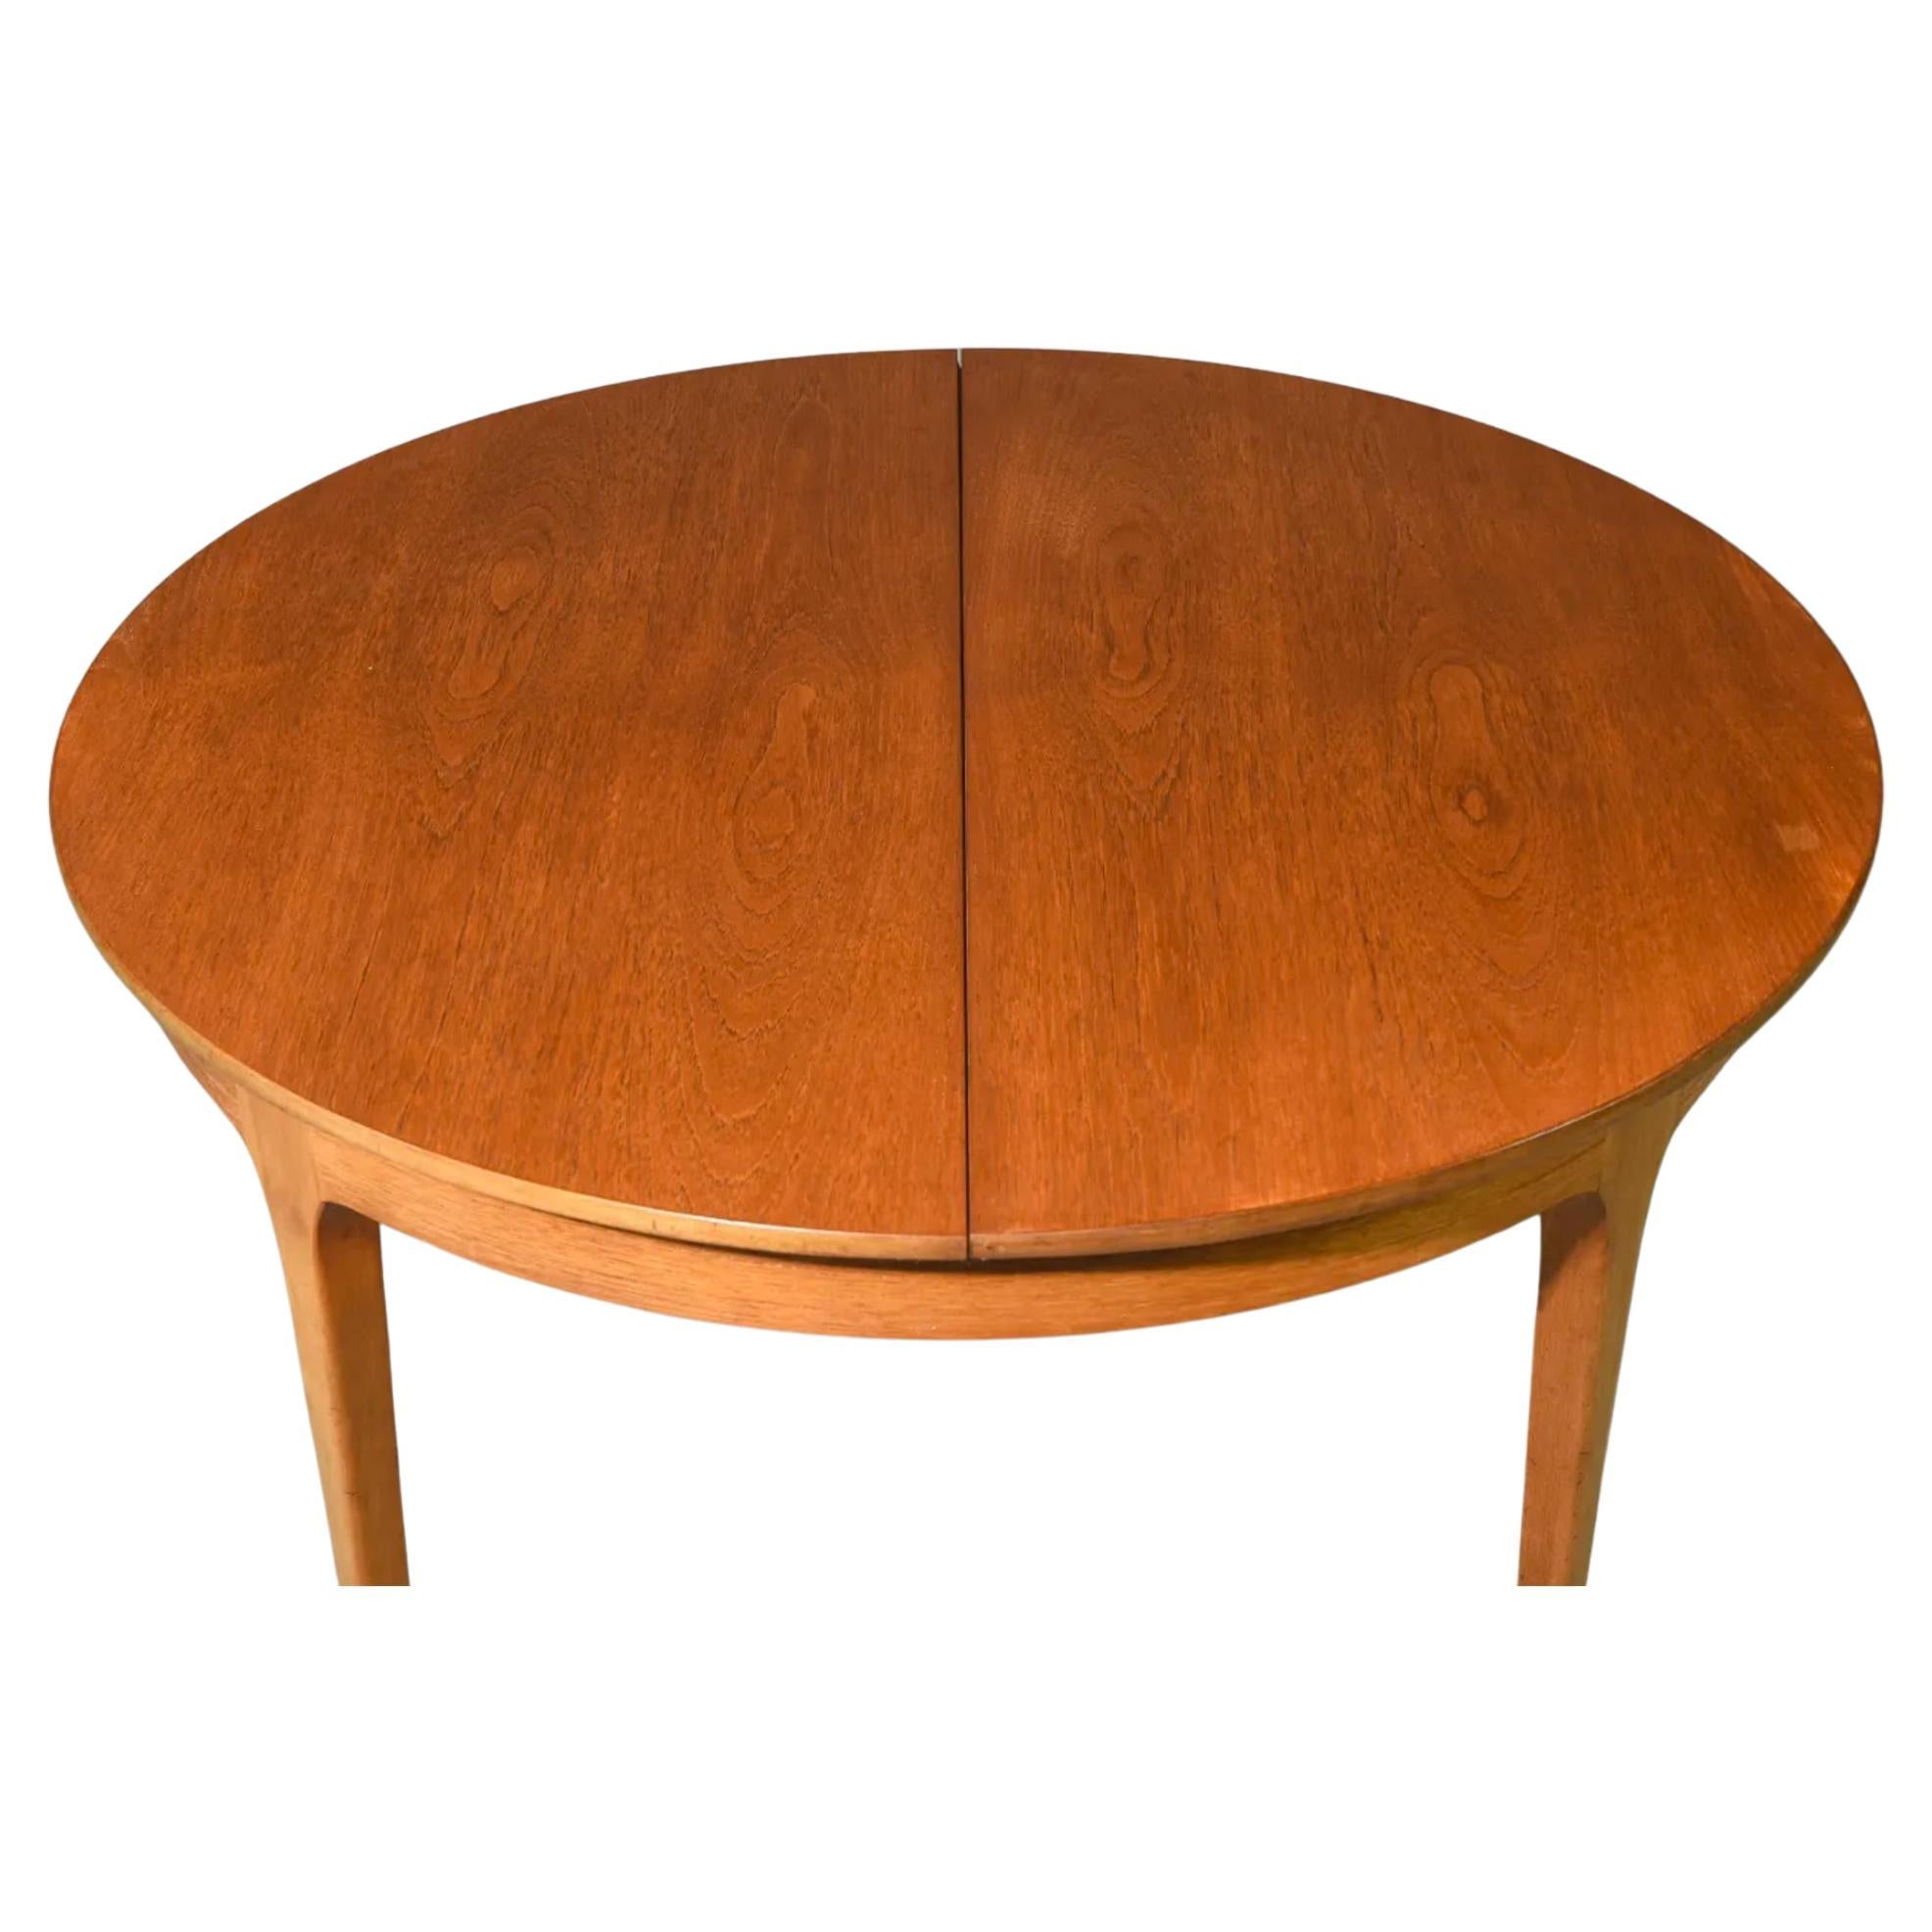 Mid century Danish Modern round Teak dining table with (1) pop up leaf. Danish Modern Round Dining Table By Sutcliffe. Made in Denmark. Located In Brooklyn NYC.

Ready for use.

Measures  30